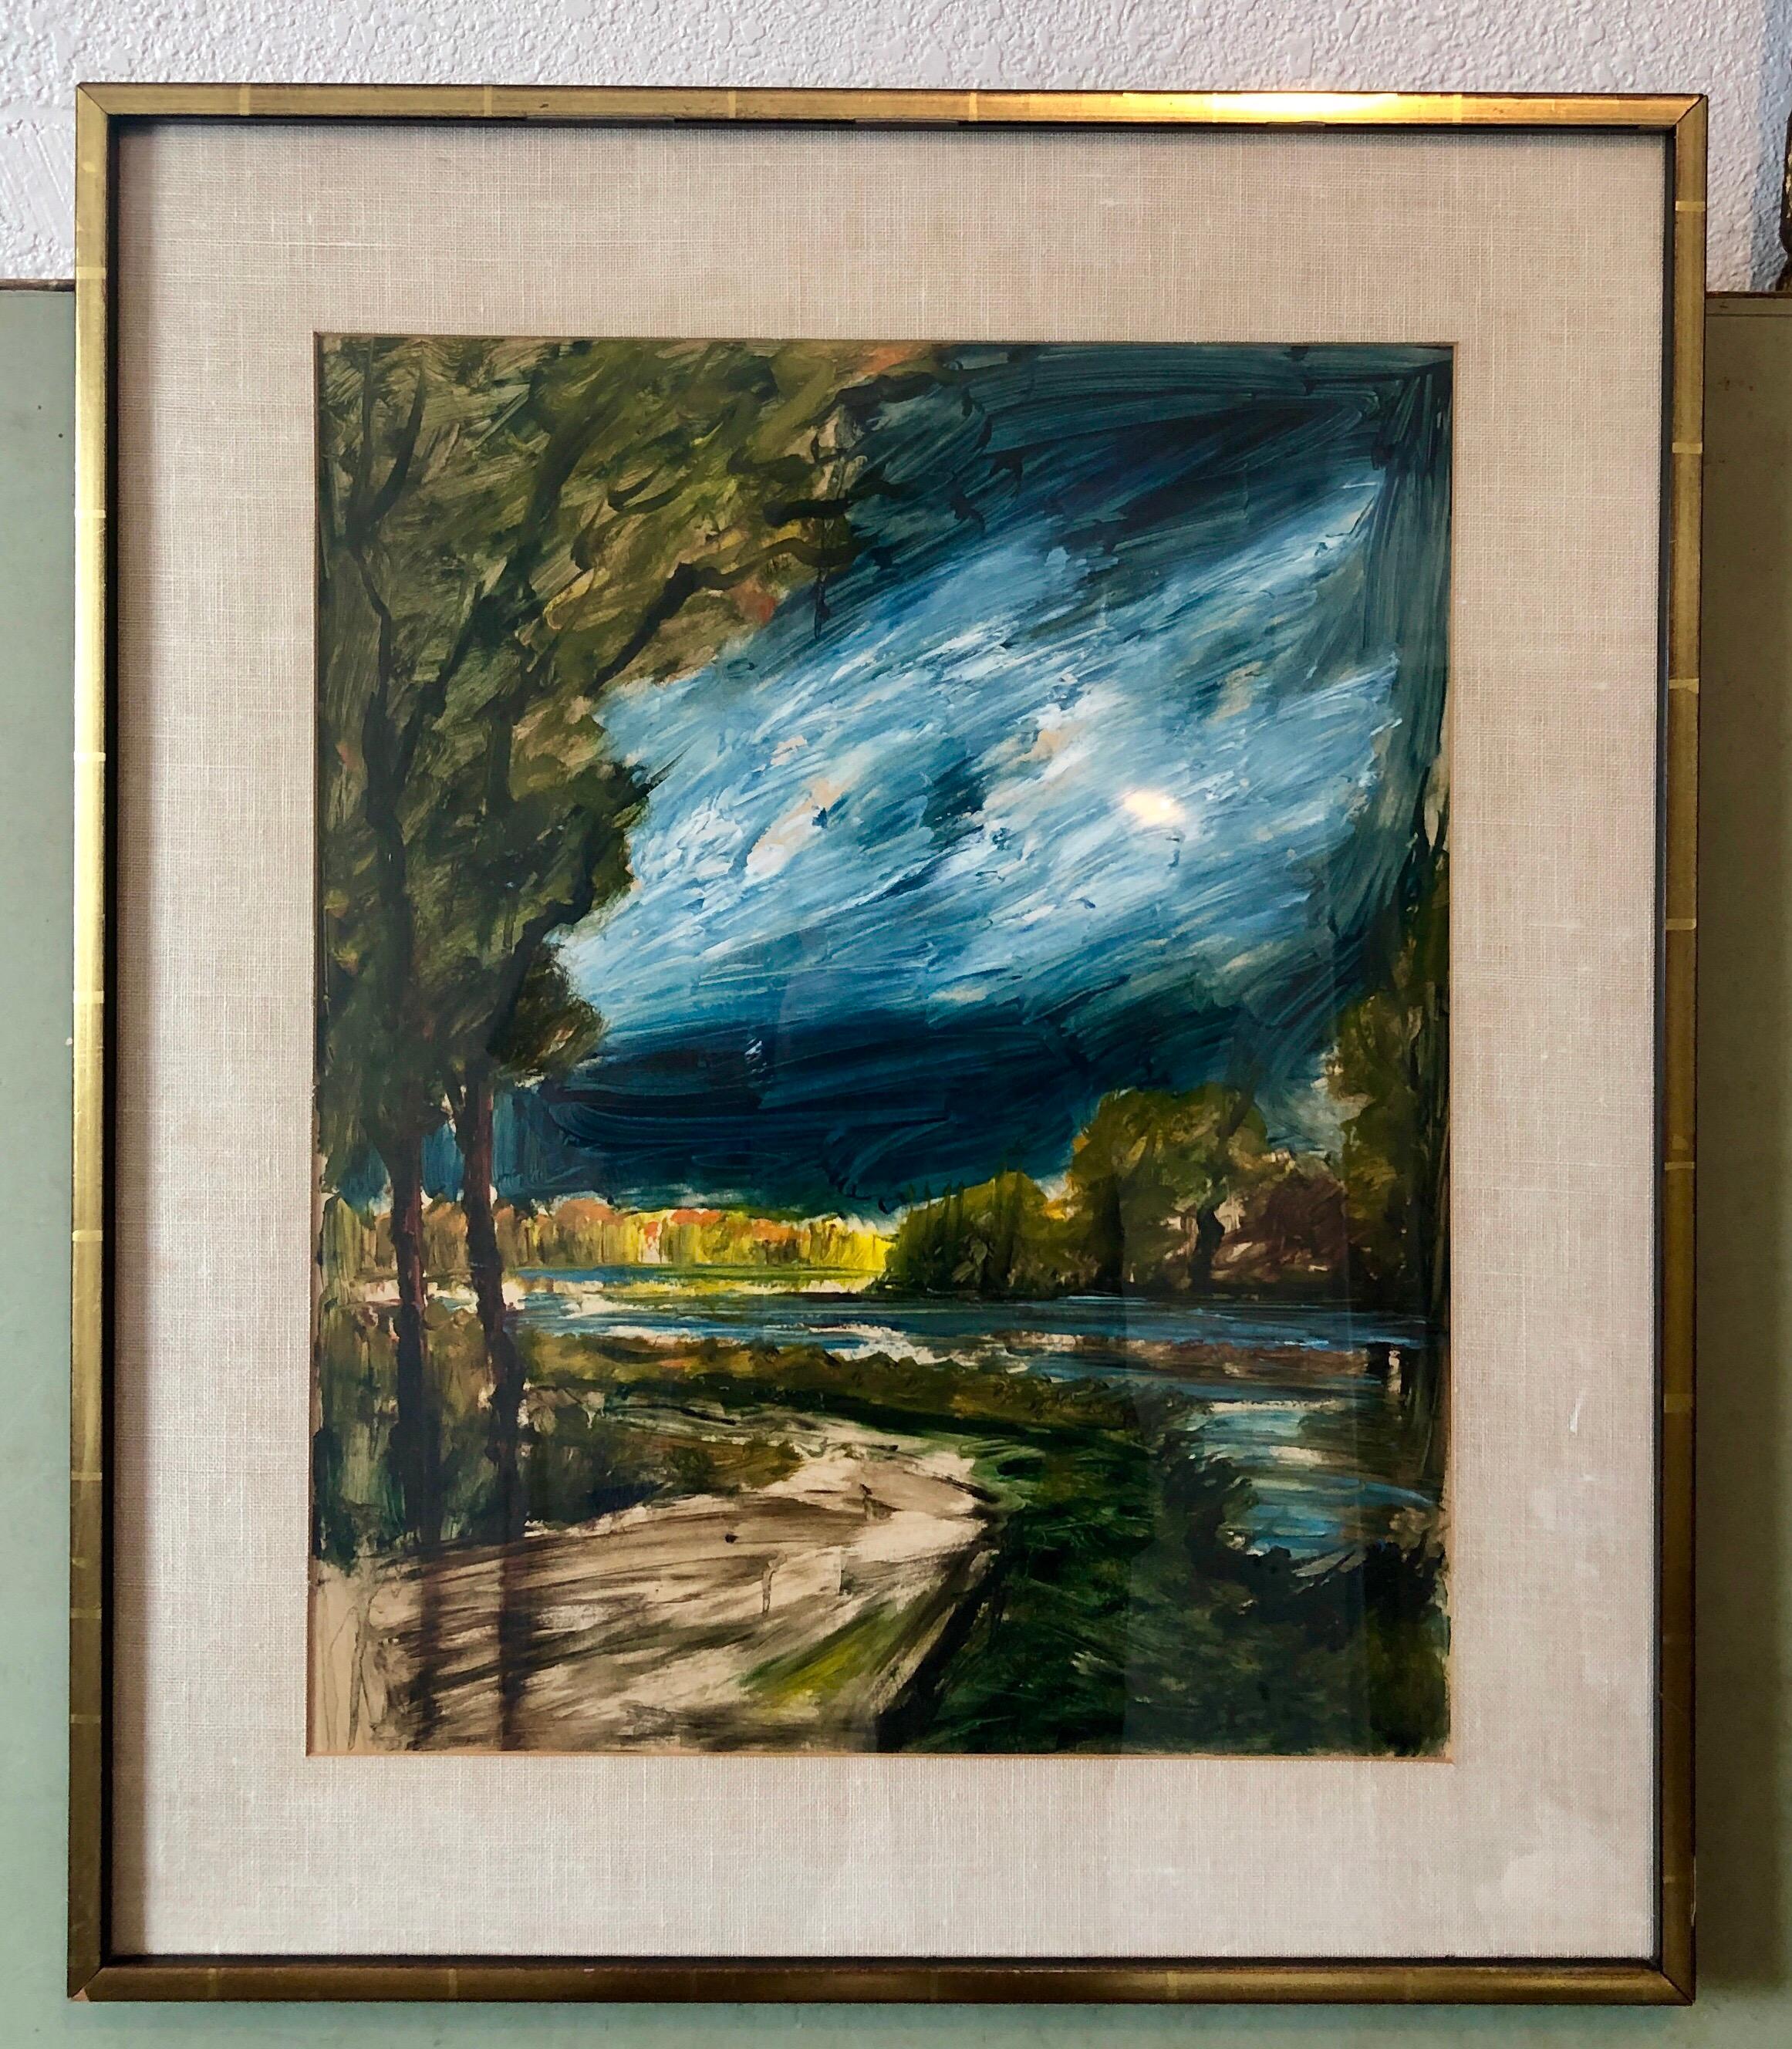 Mid Century Modernist French Painting Landscape With Forest, River, Path - Black Landscape Art by Roger Etienne